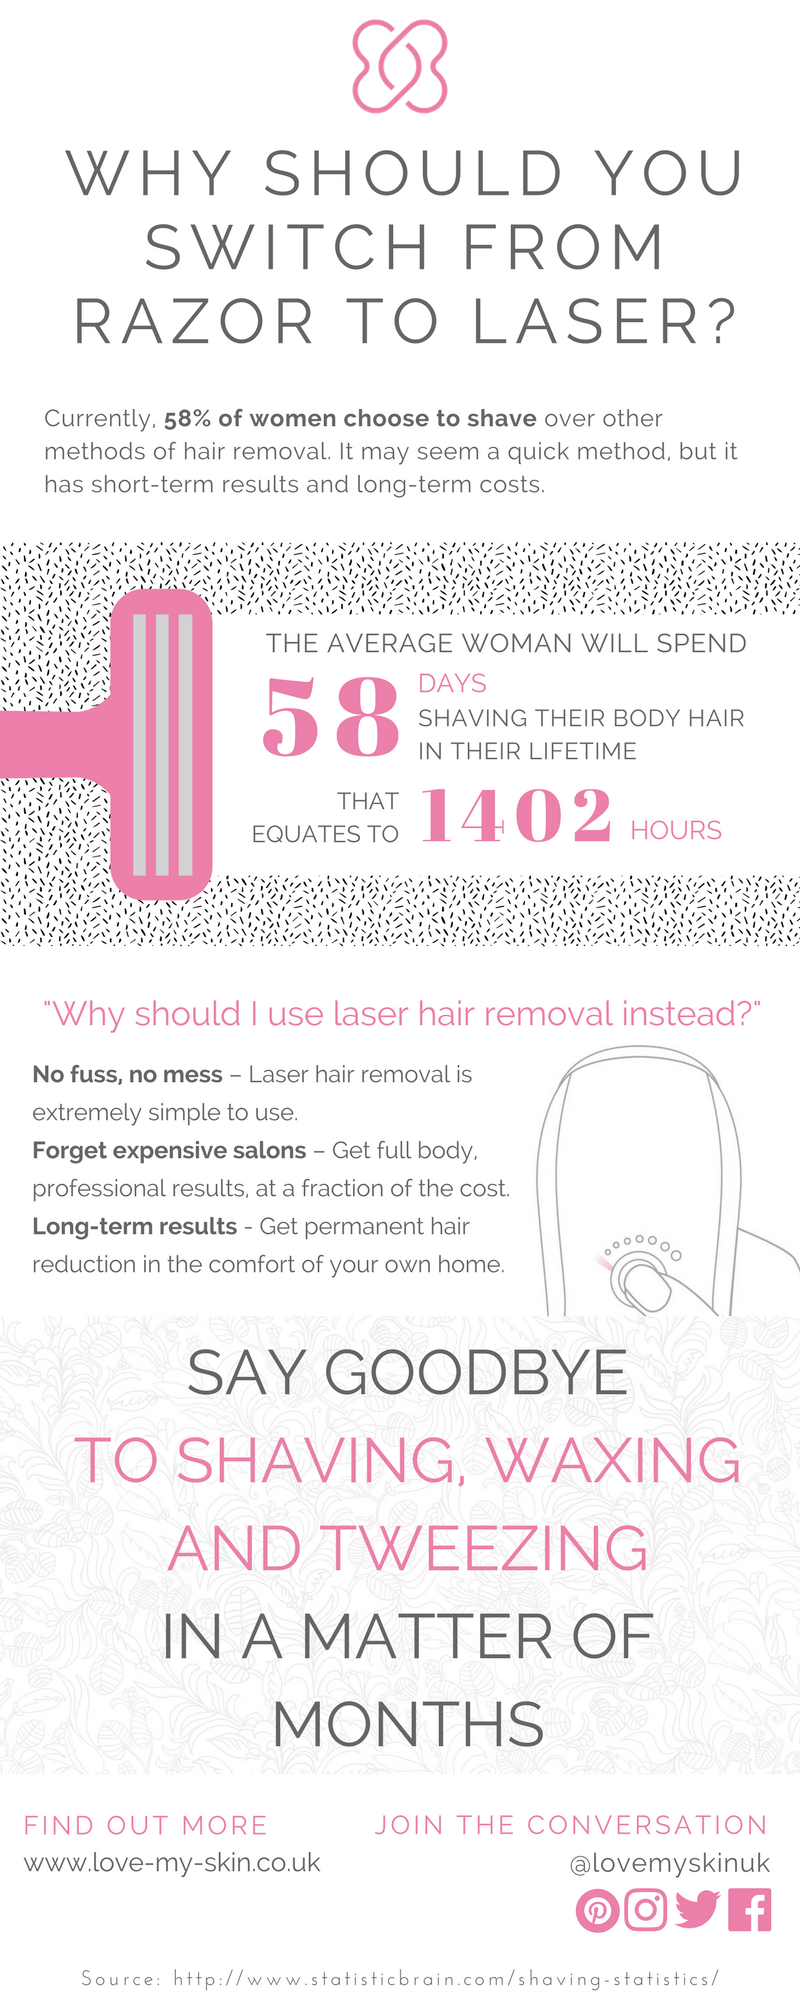 WHY SHOULD YOU SWITCH FROM RAZOR TO LASER